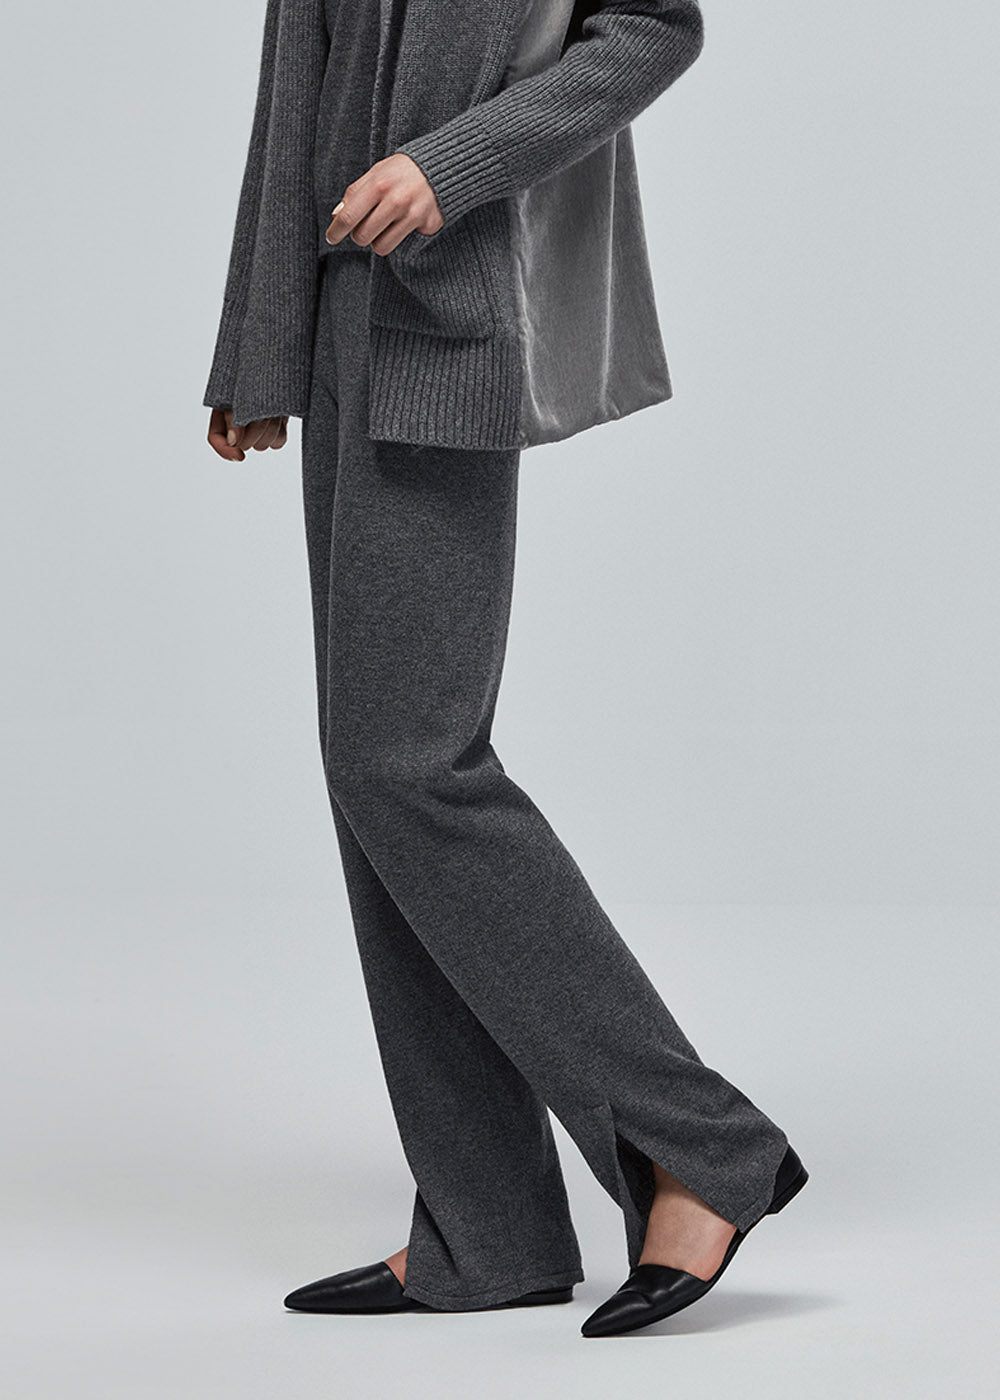 Tina Knit Trousers - Small / Grey